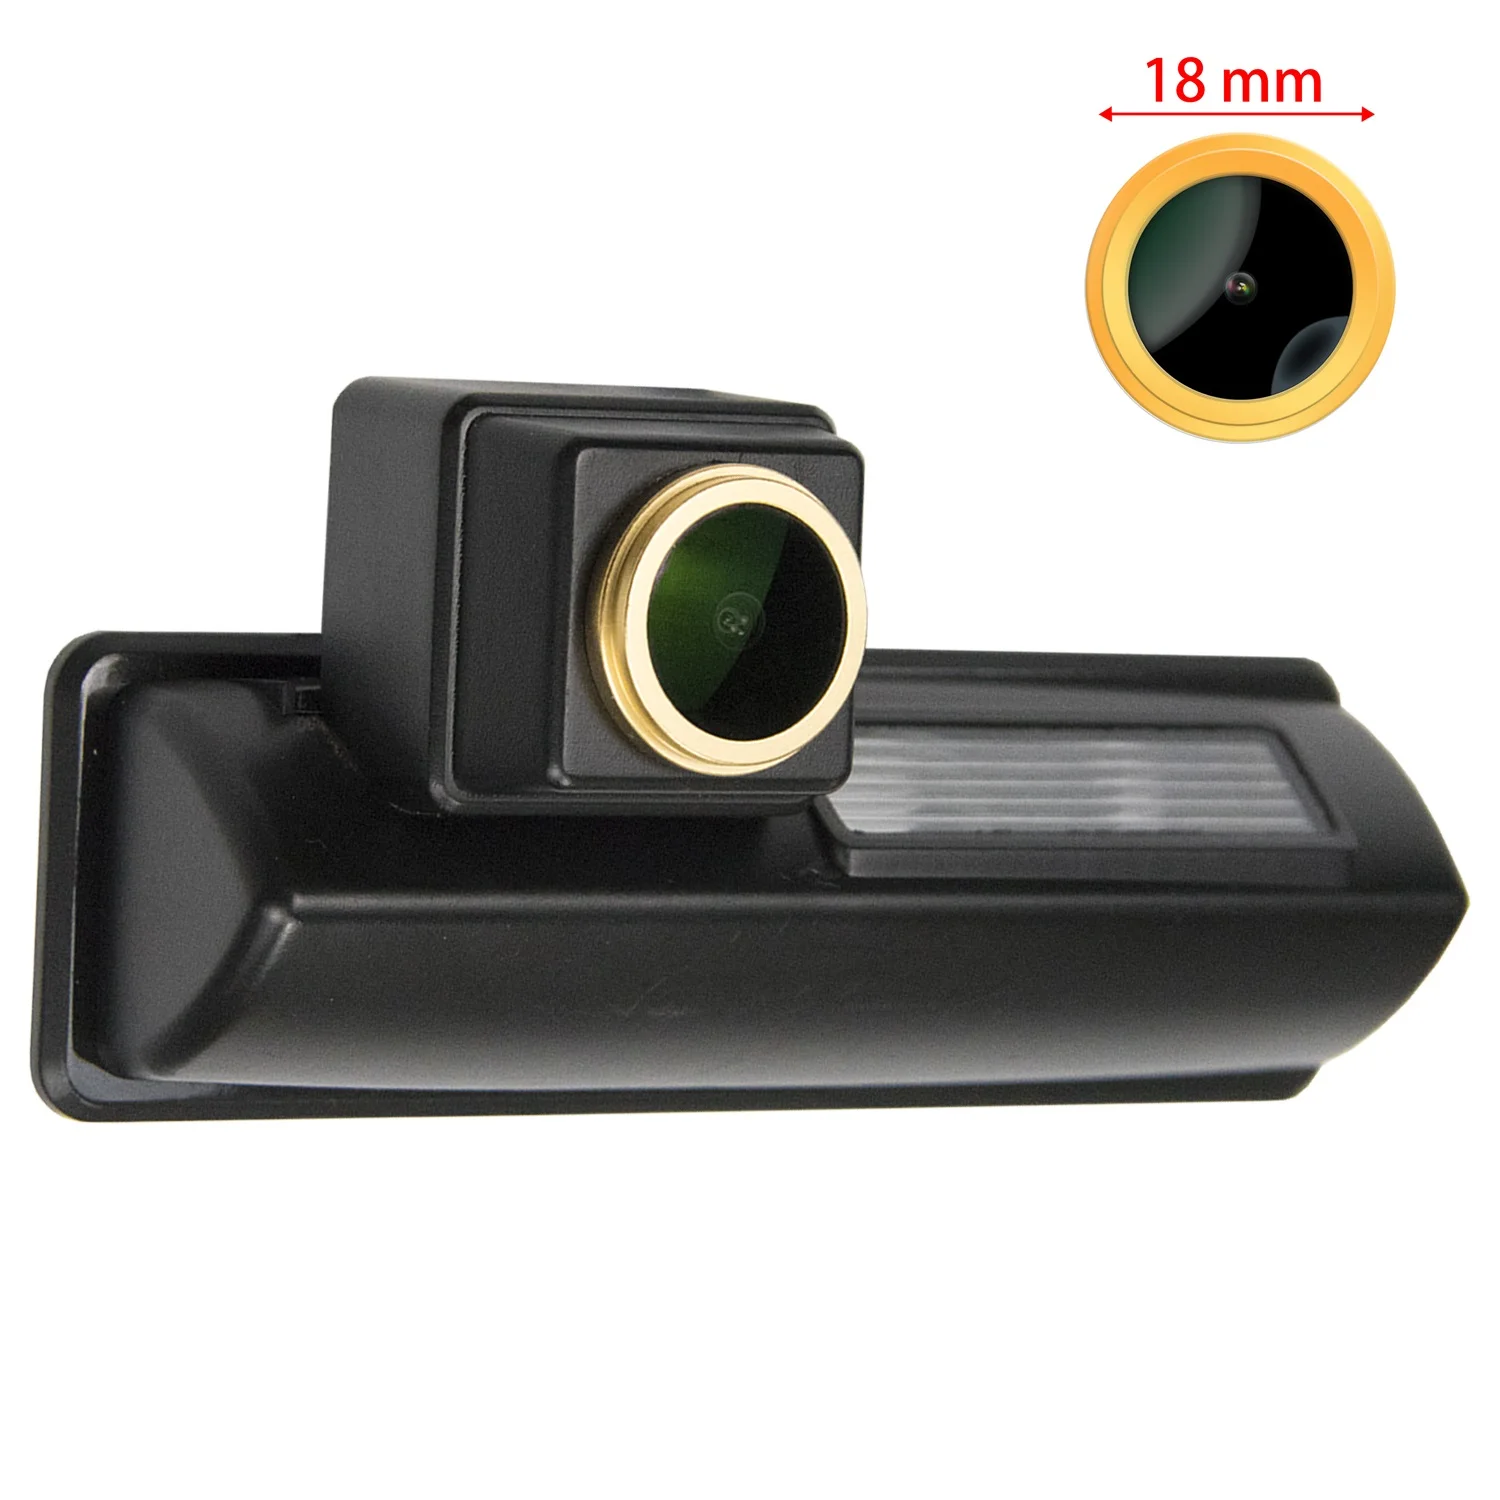 

Misayaee HD Car Rear View Parking Reverse Camera for Toyota Camry XV40 AURION IS200 IS300 RX 300 RX330 RX350 RX400h Harrier